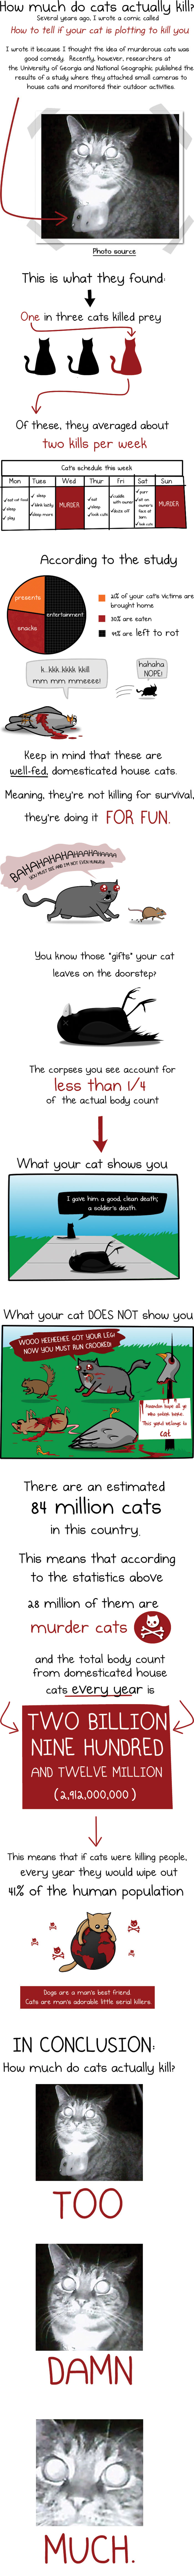 Cats Love Murder Infographic